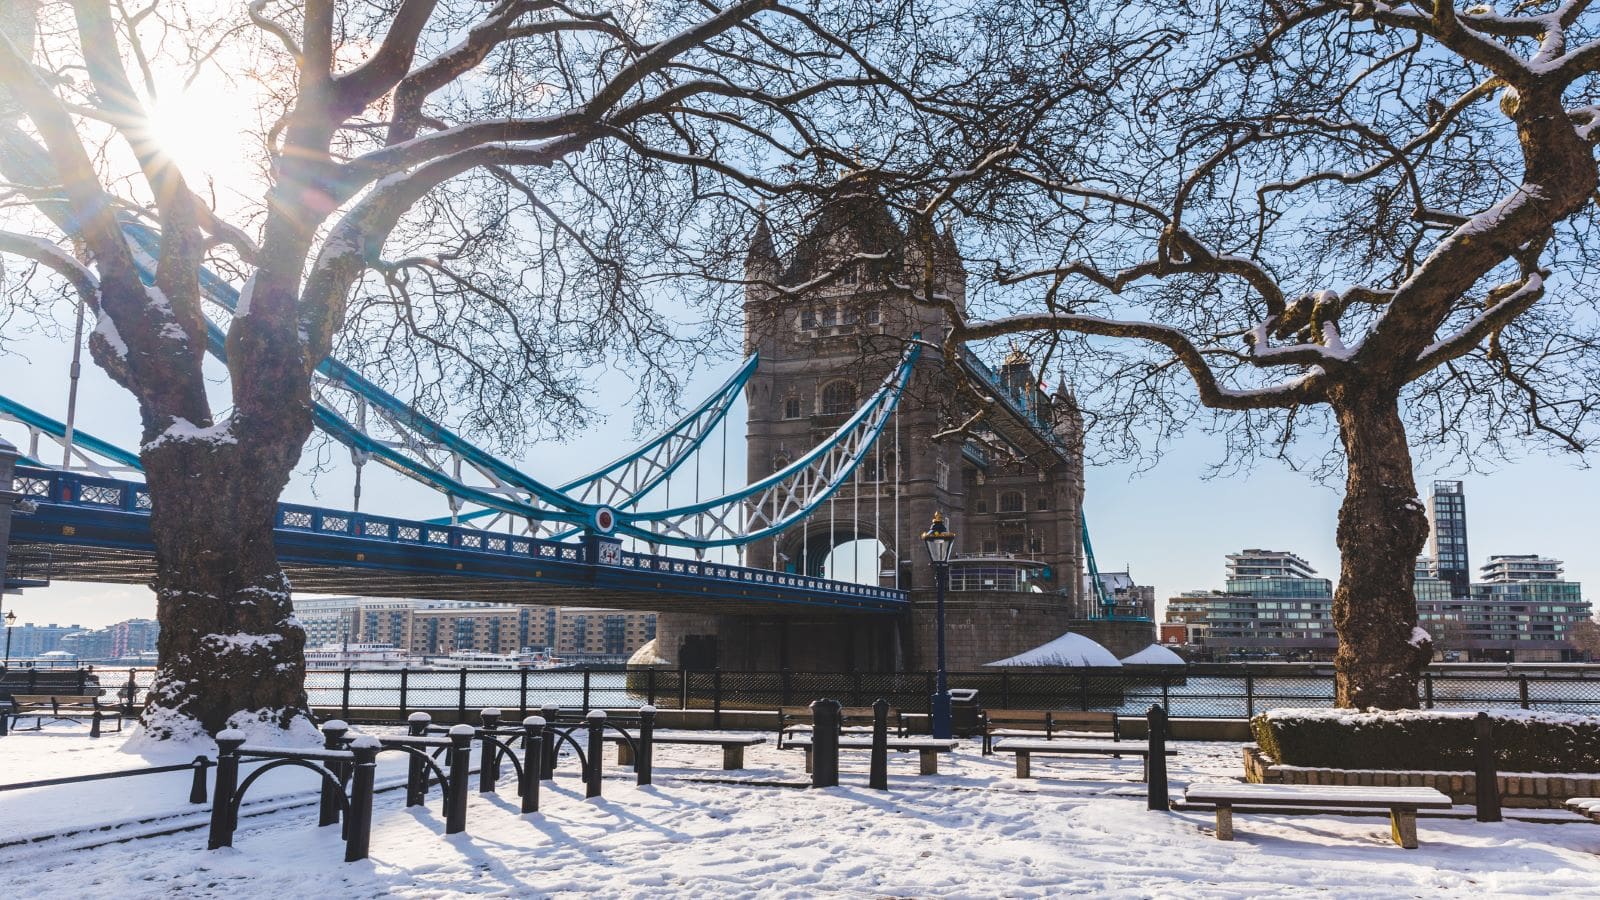 Tower bridge and trees in London with snow. Unusual view of the bridge and the capital city covered by snow.